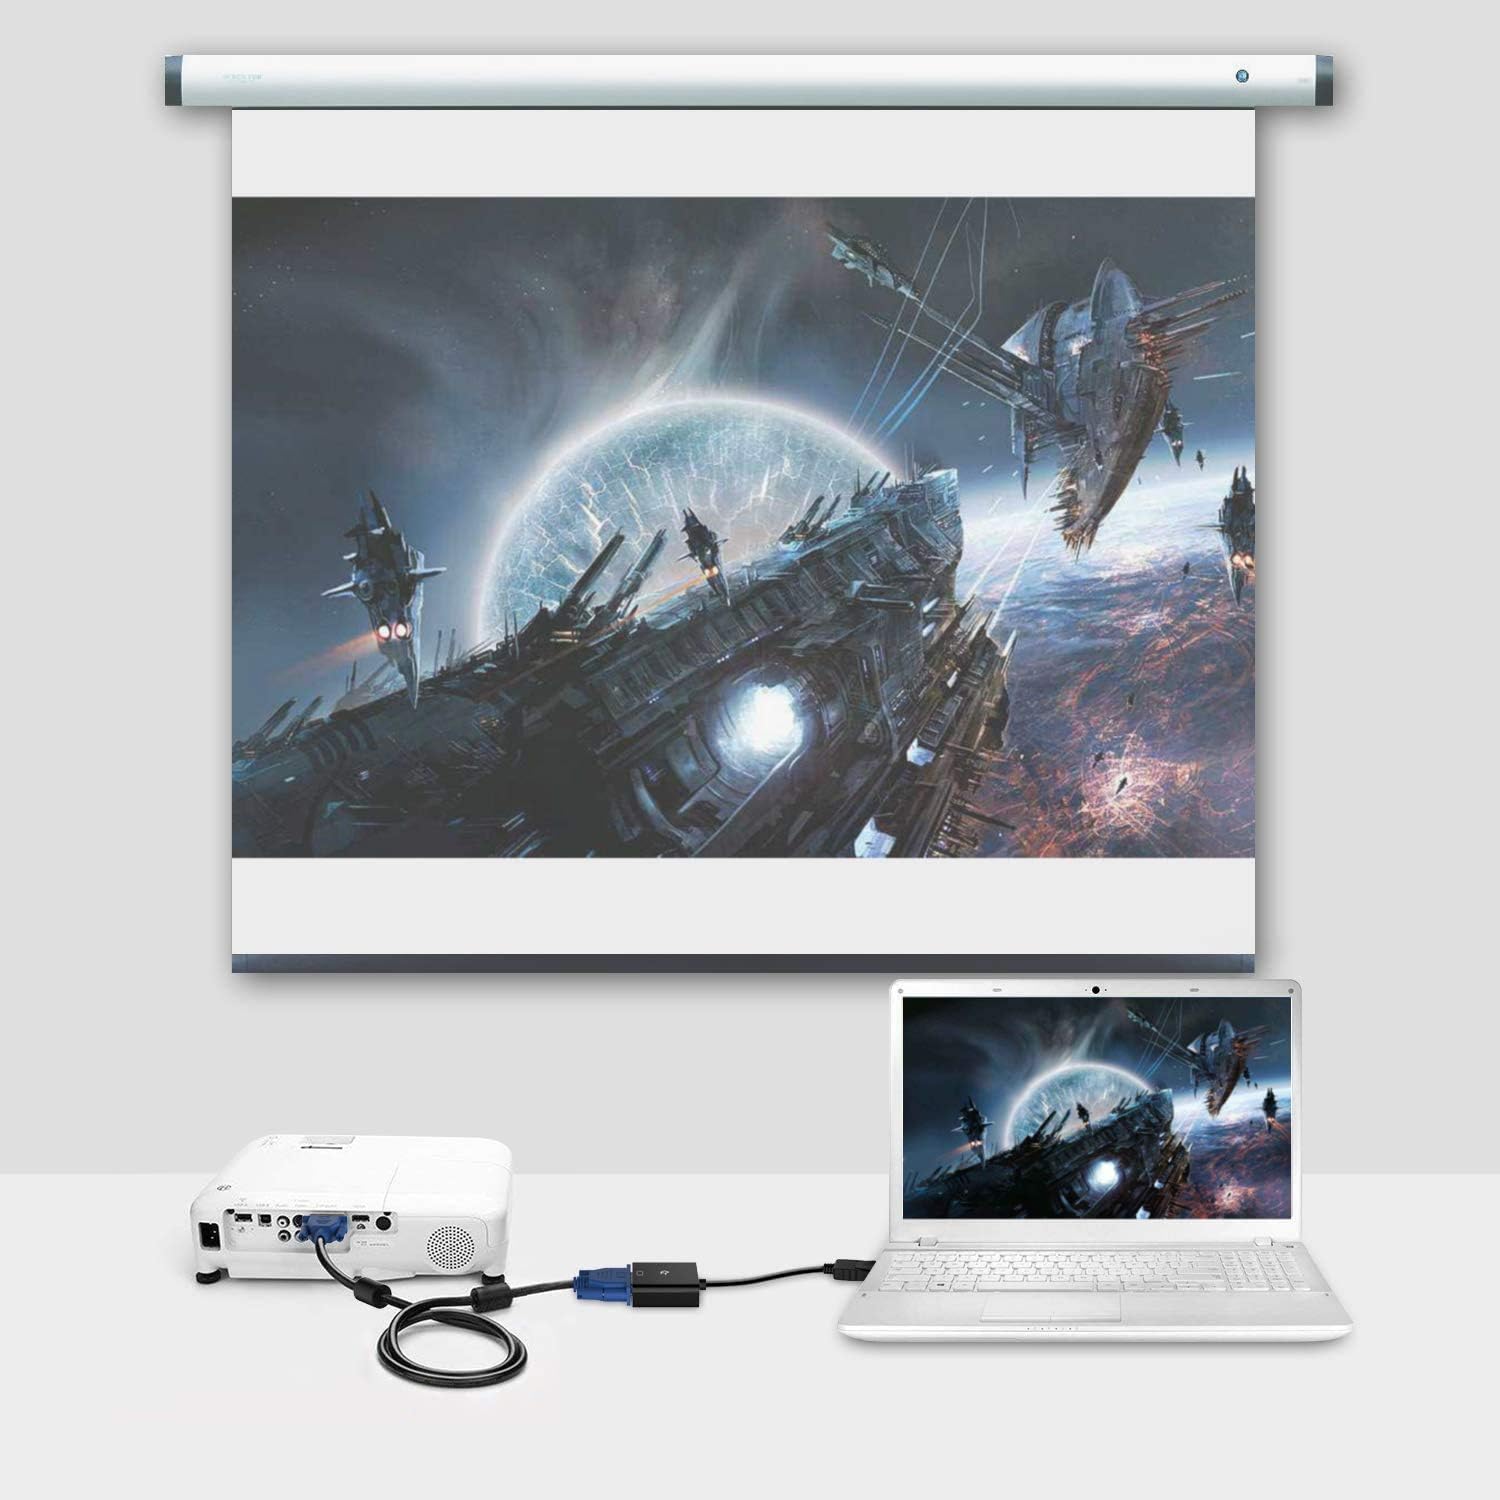 Quality Assured Male to Male VGA Cable Support Monitor/PC/LCD/LED, Plasma, Projector, TFT (LST-VGACBLE-1.5M) - 1.5M